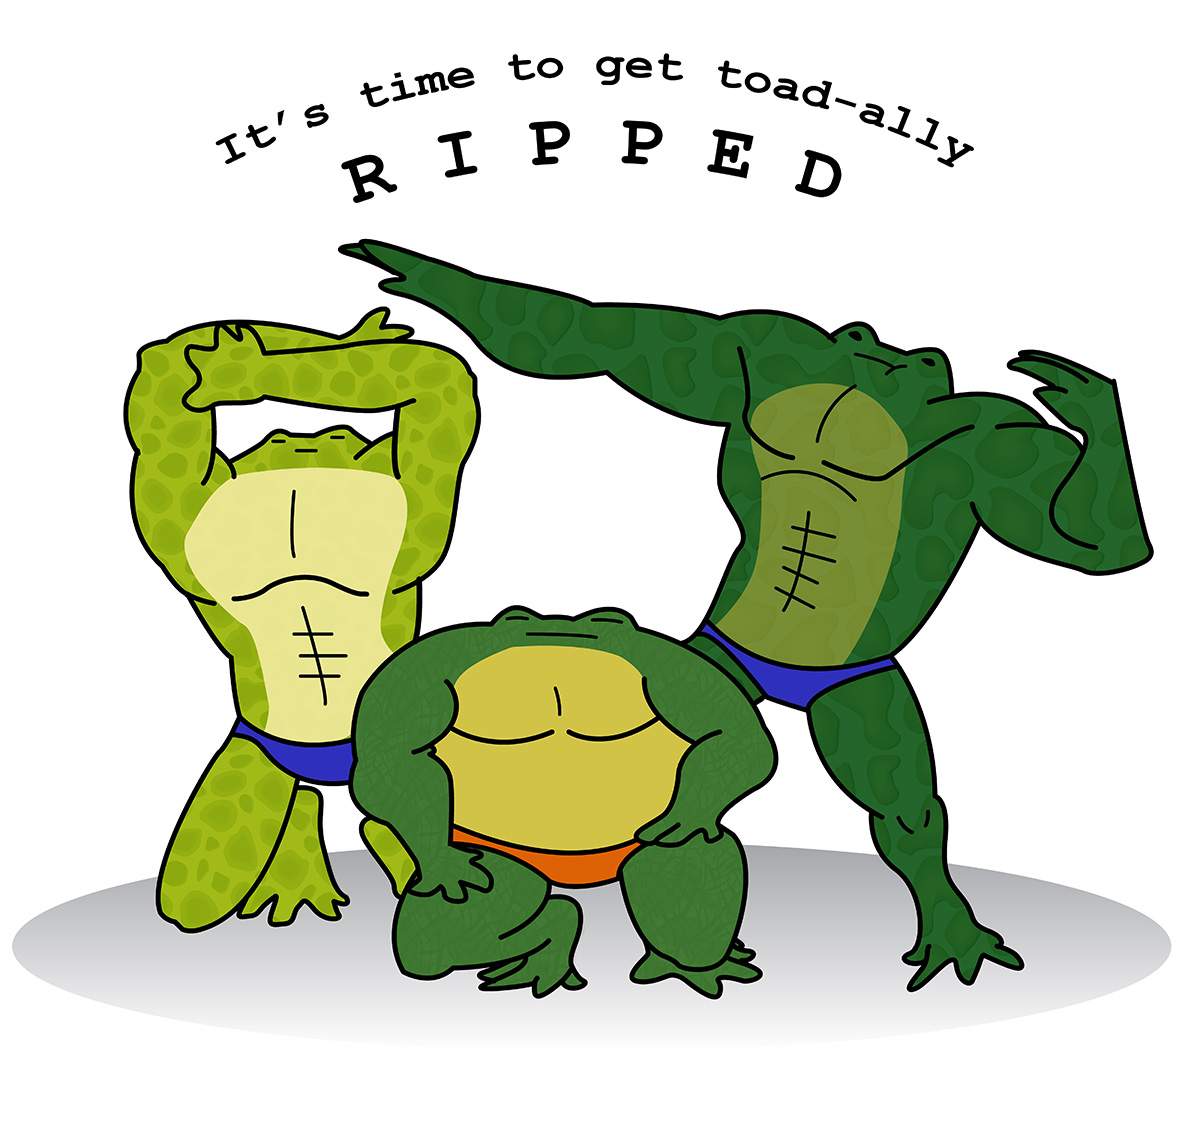 6-24-20_frog_muscle_poses-01_resize.jpg